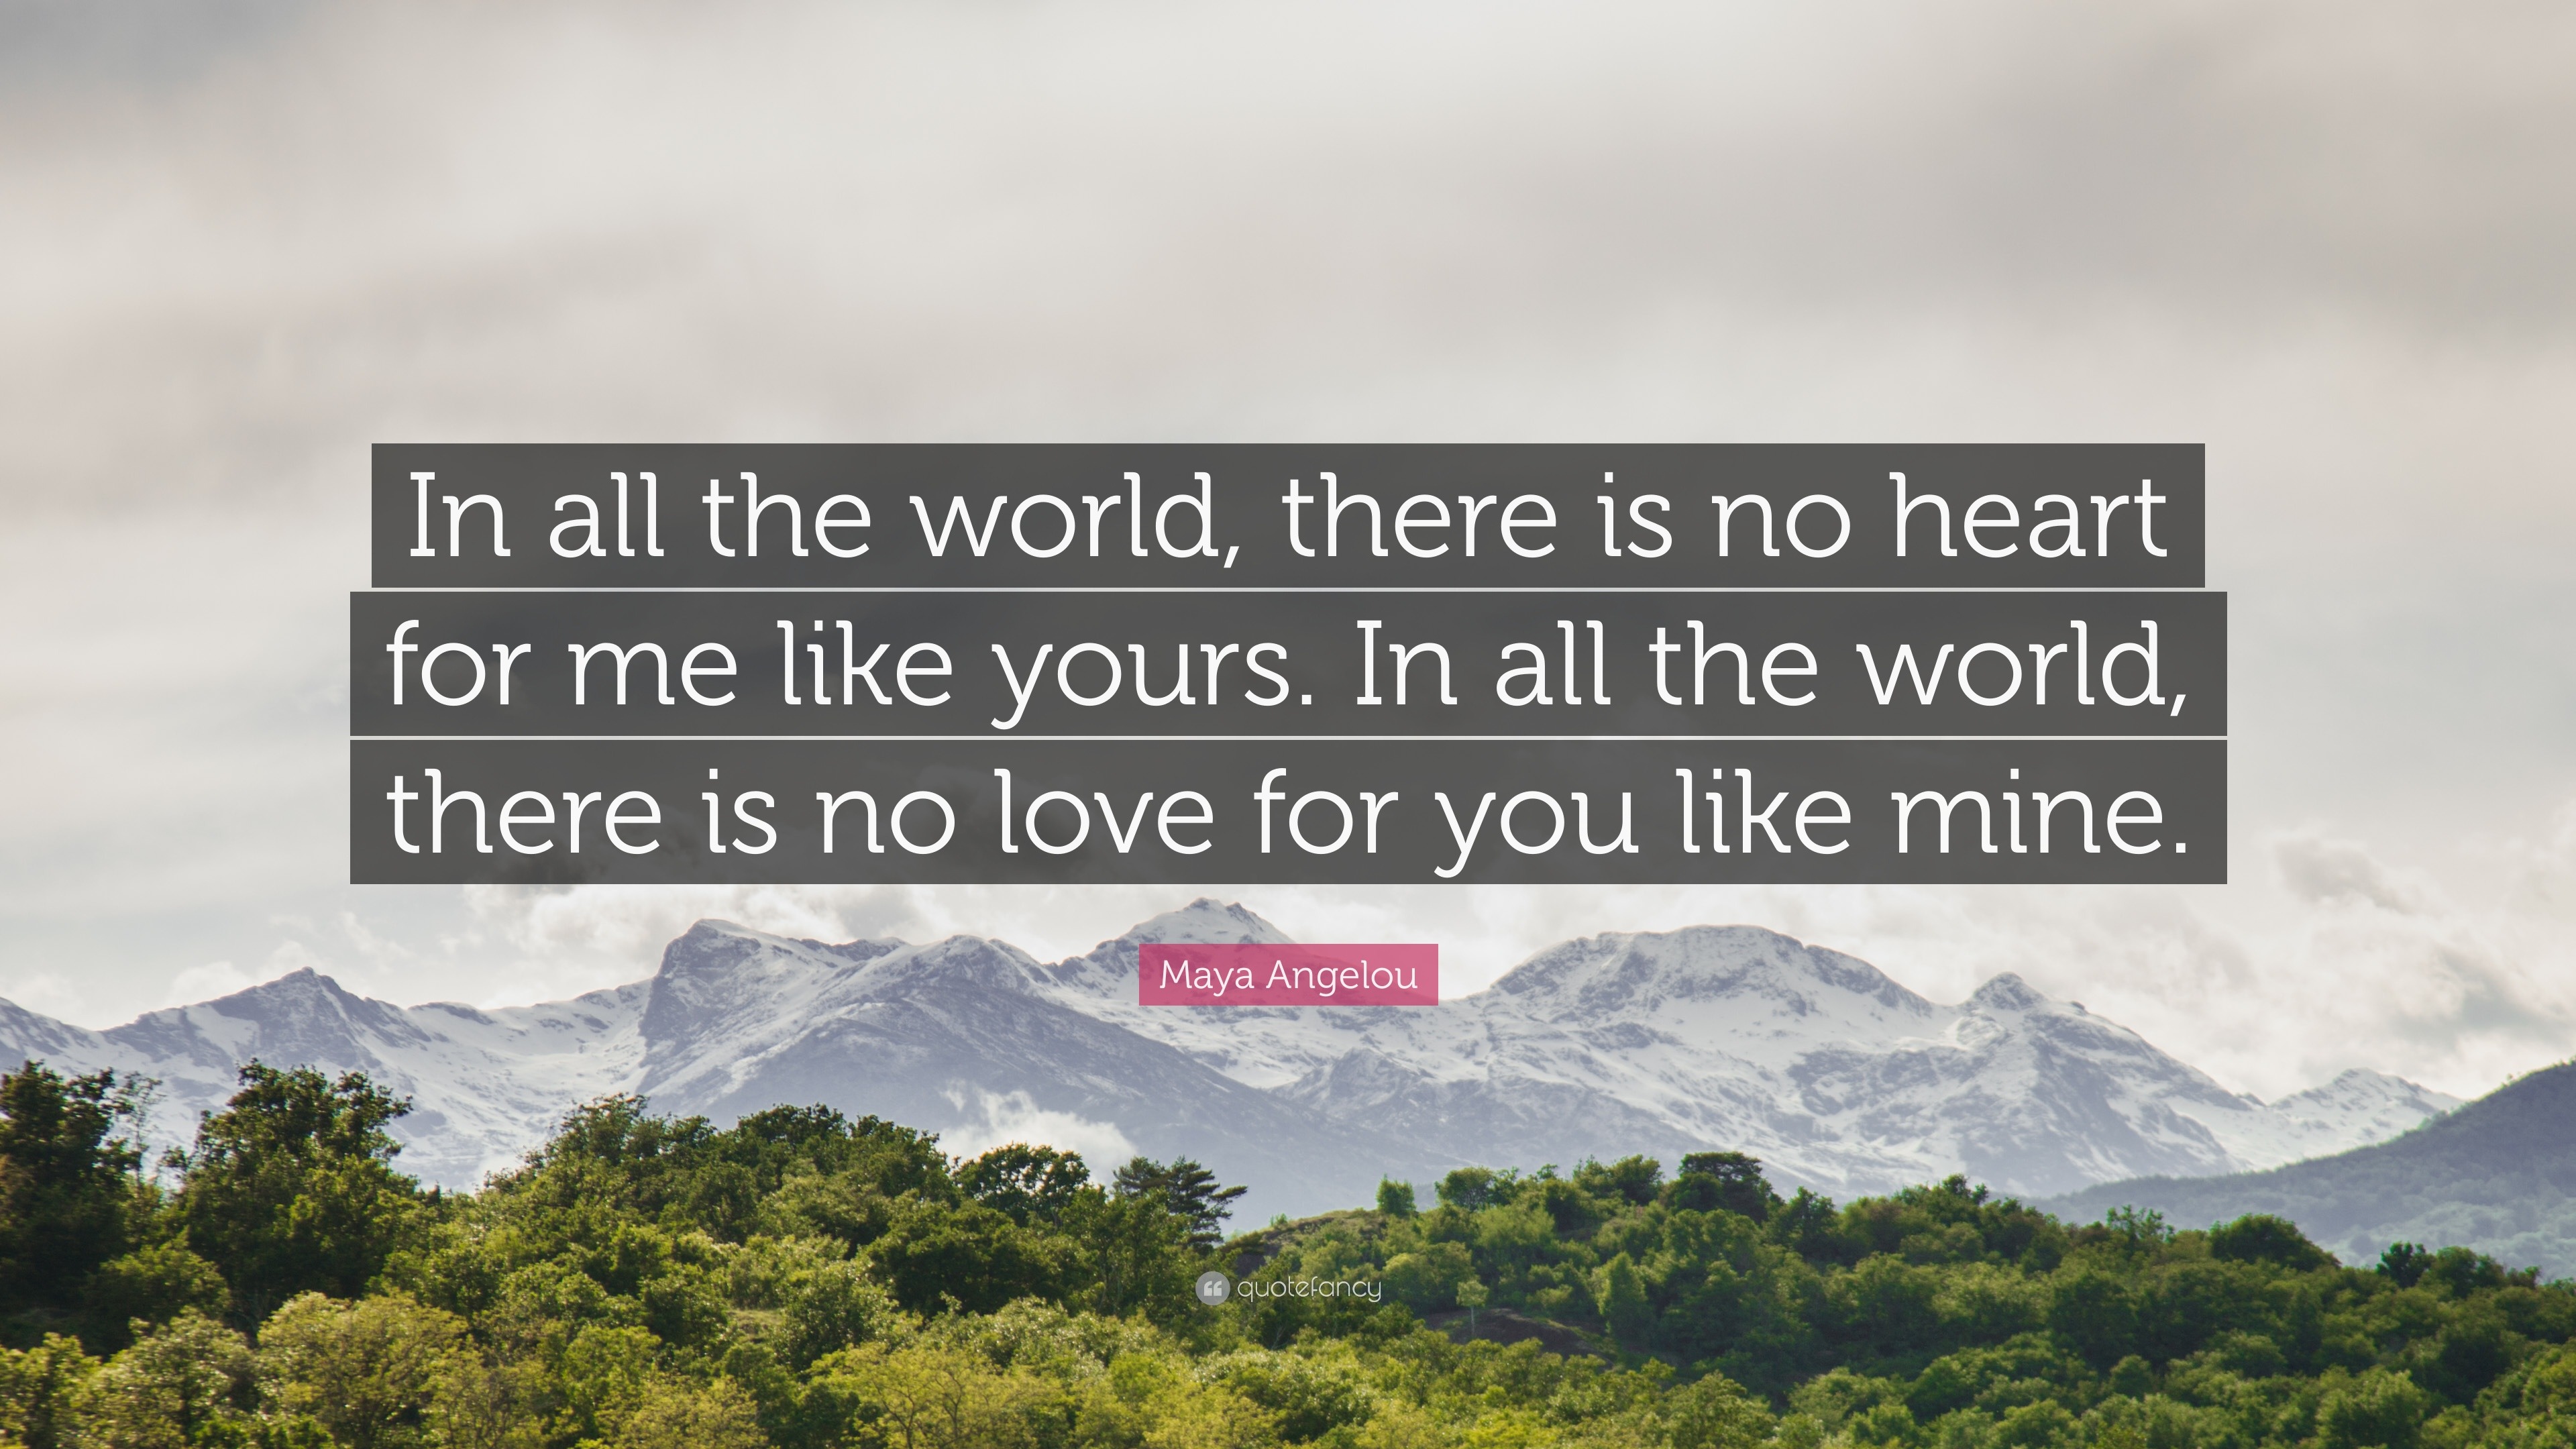 Maya Angelou Quote “In all the world there is no heart for me